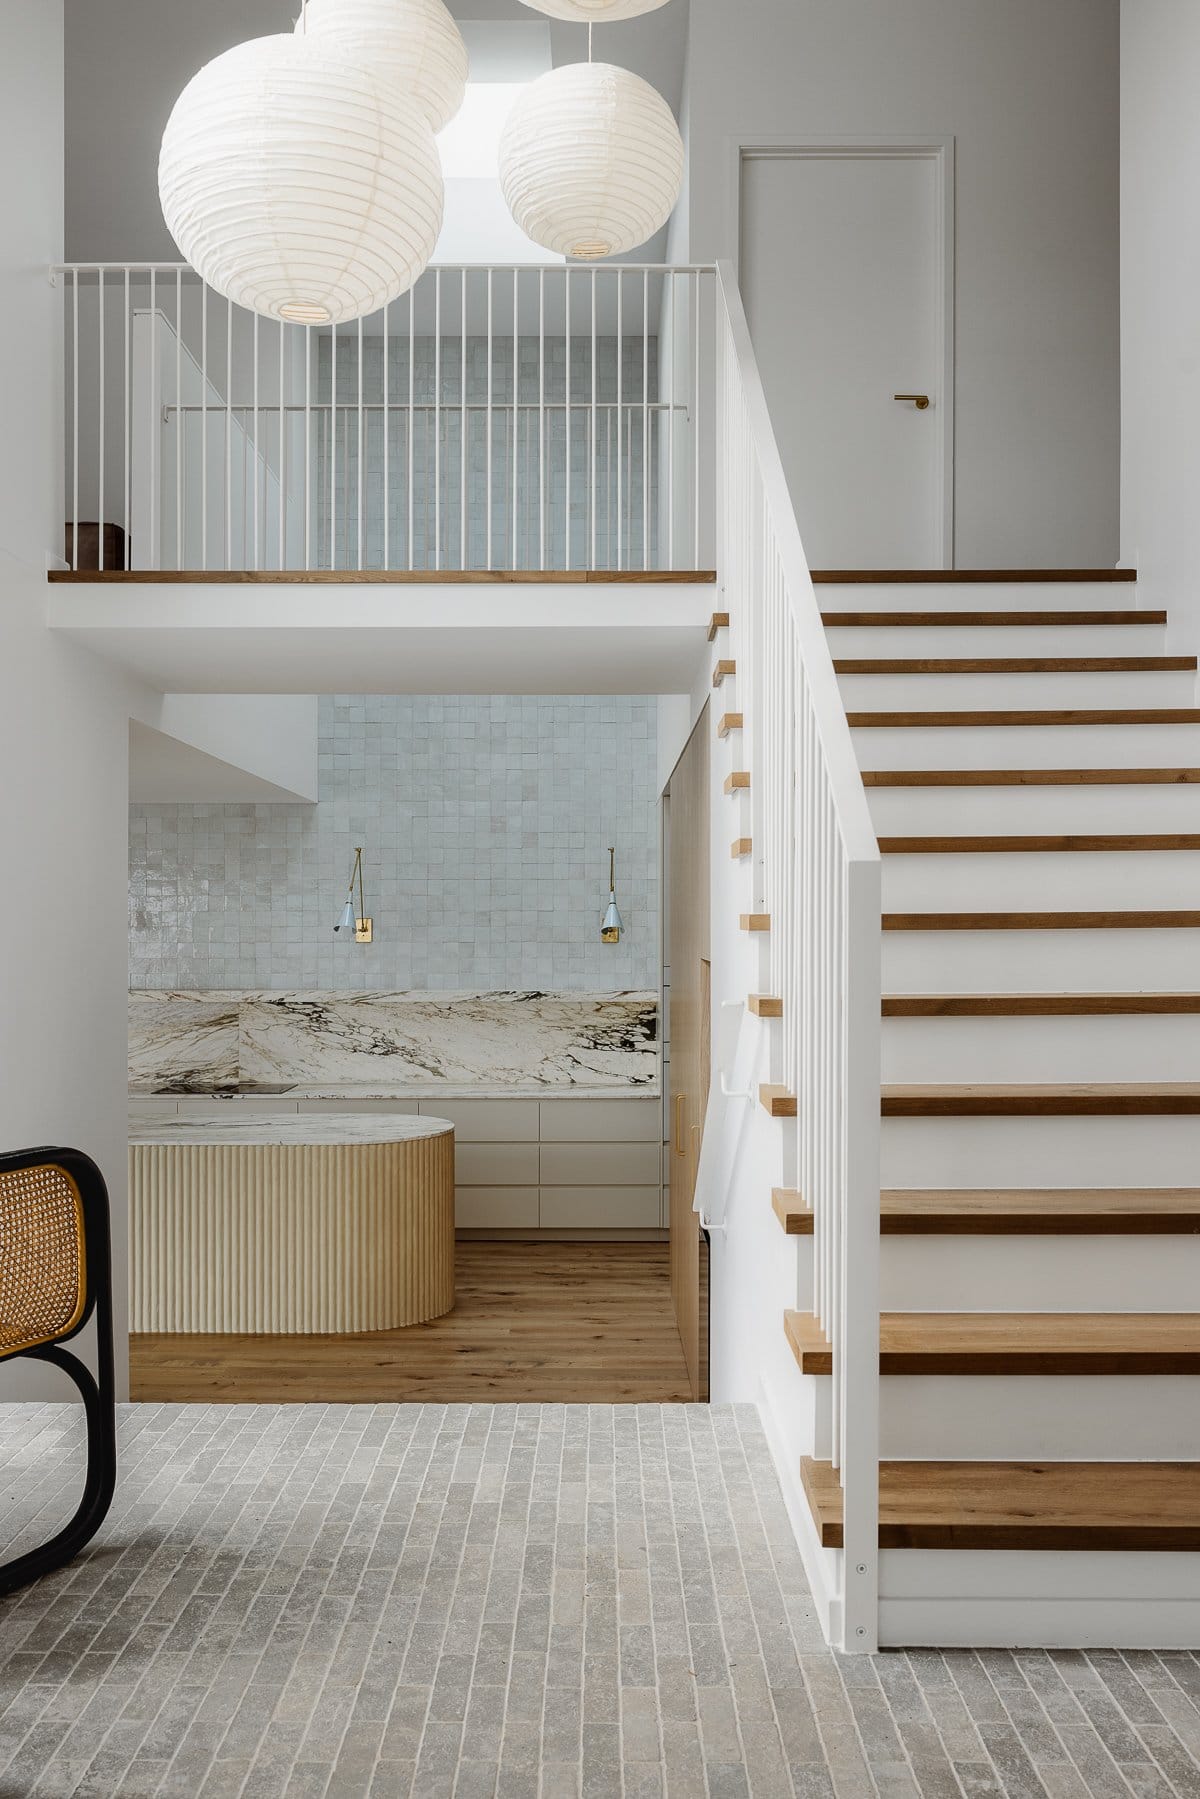 Hazlewood House by Favell Architects. Photography by Andy Macpherson. Grey tiled entryway to home with white and timber staircase leading upstairs. Stairs at end of hallway leading to kitchen, with timber floors and marble splashback.